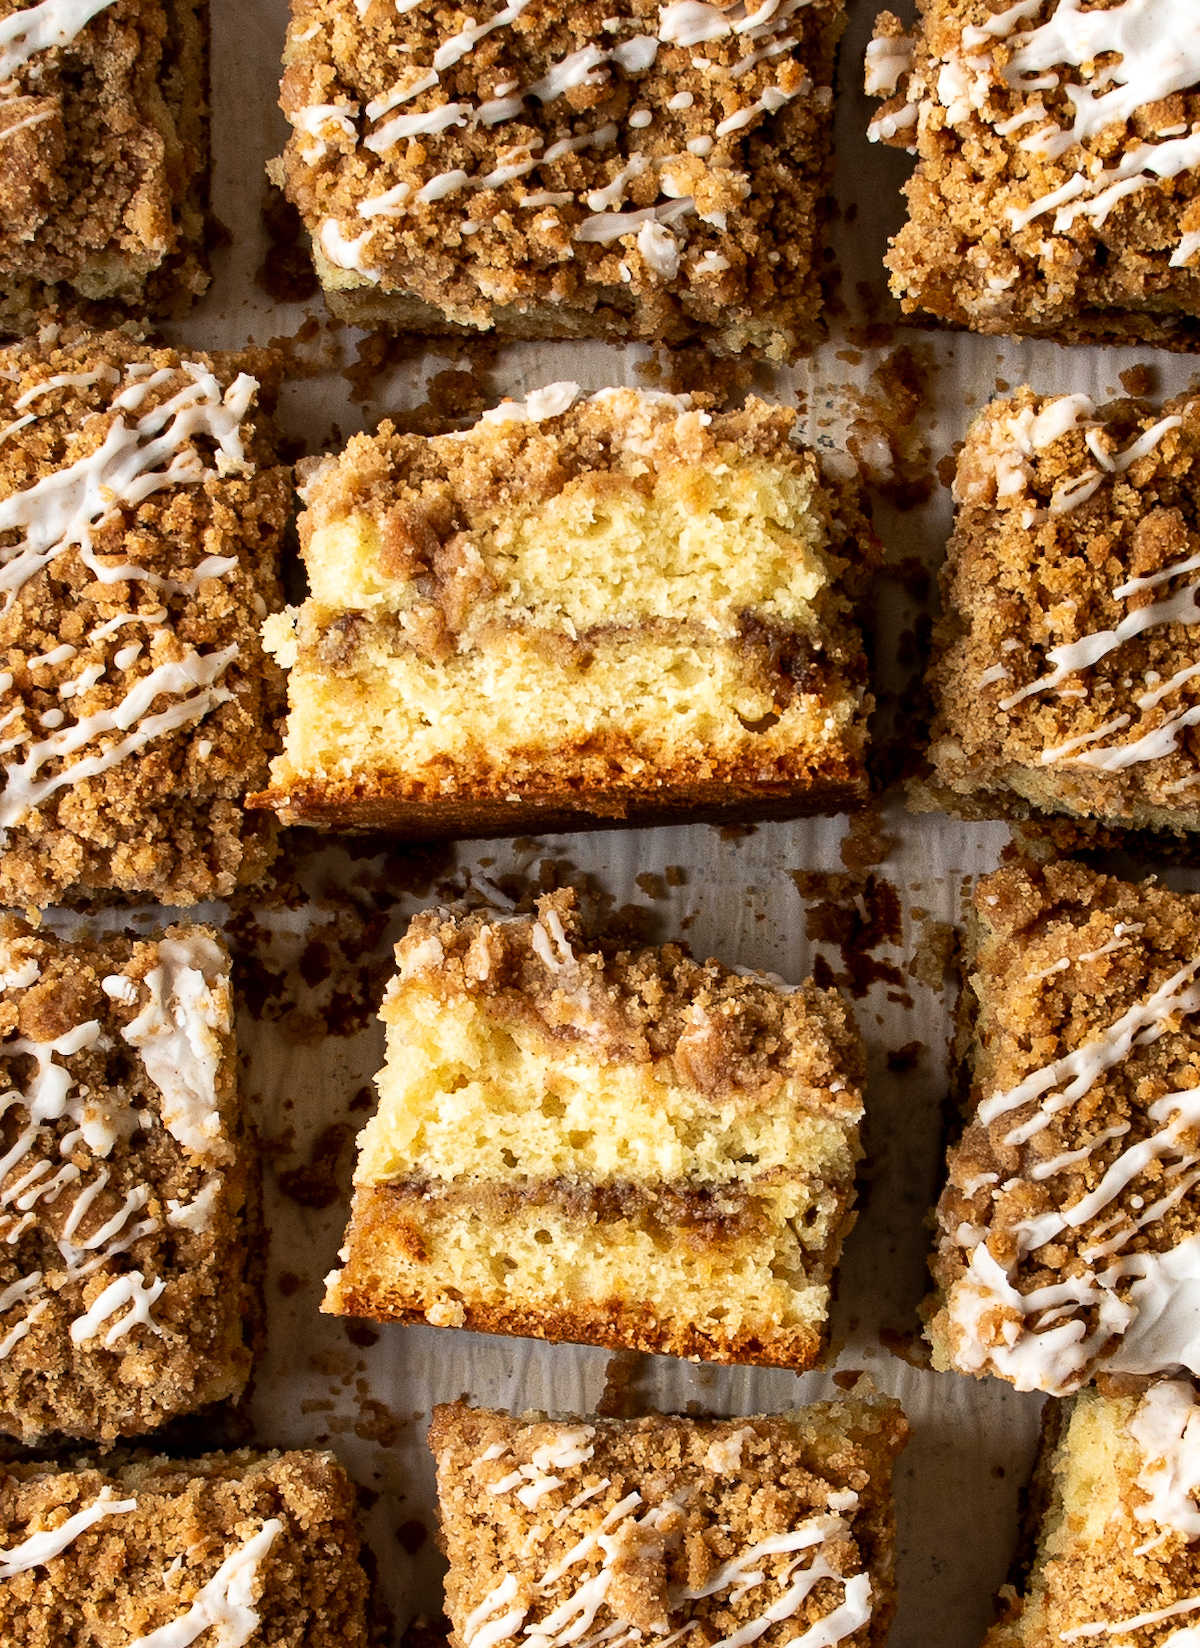 A close up shot of the side of two pieces of classic coffee cake.